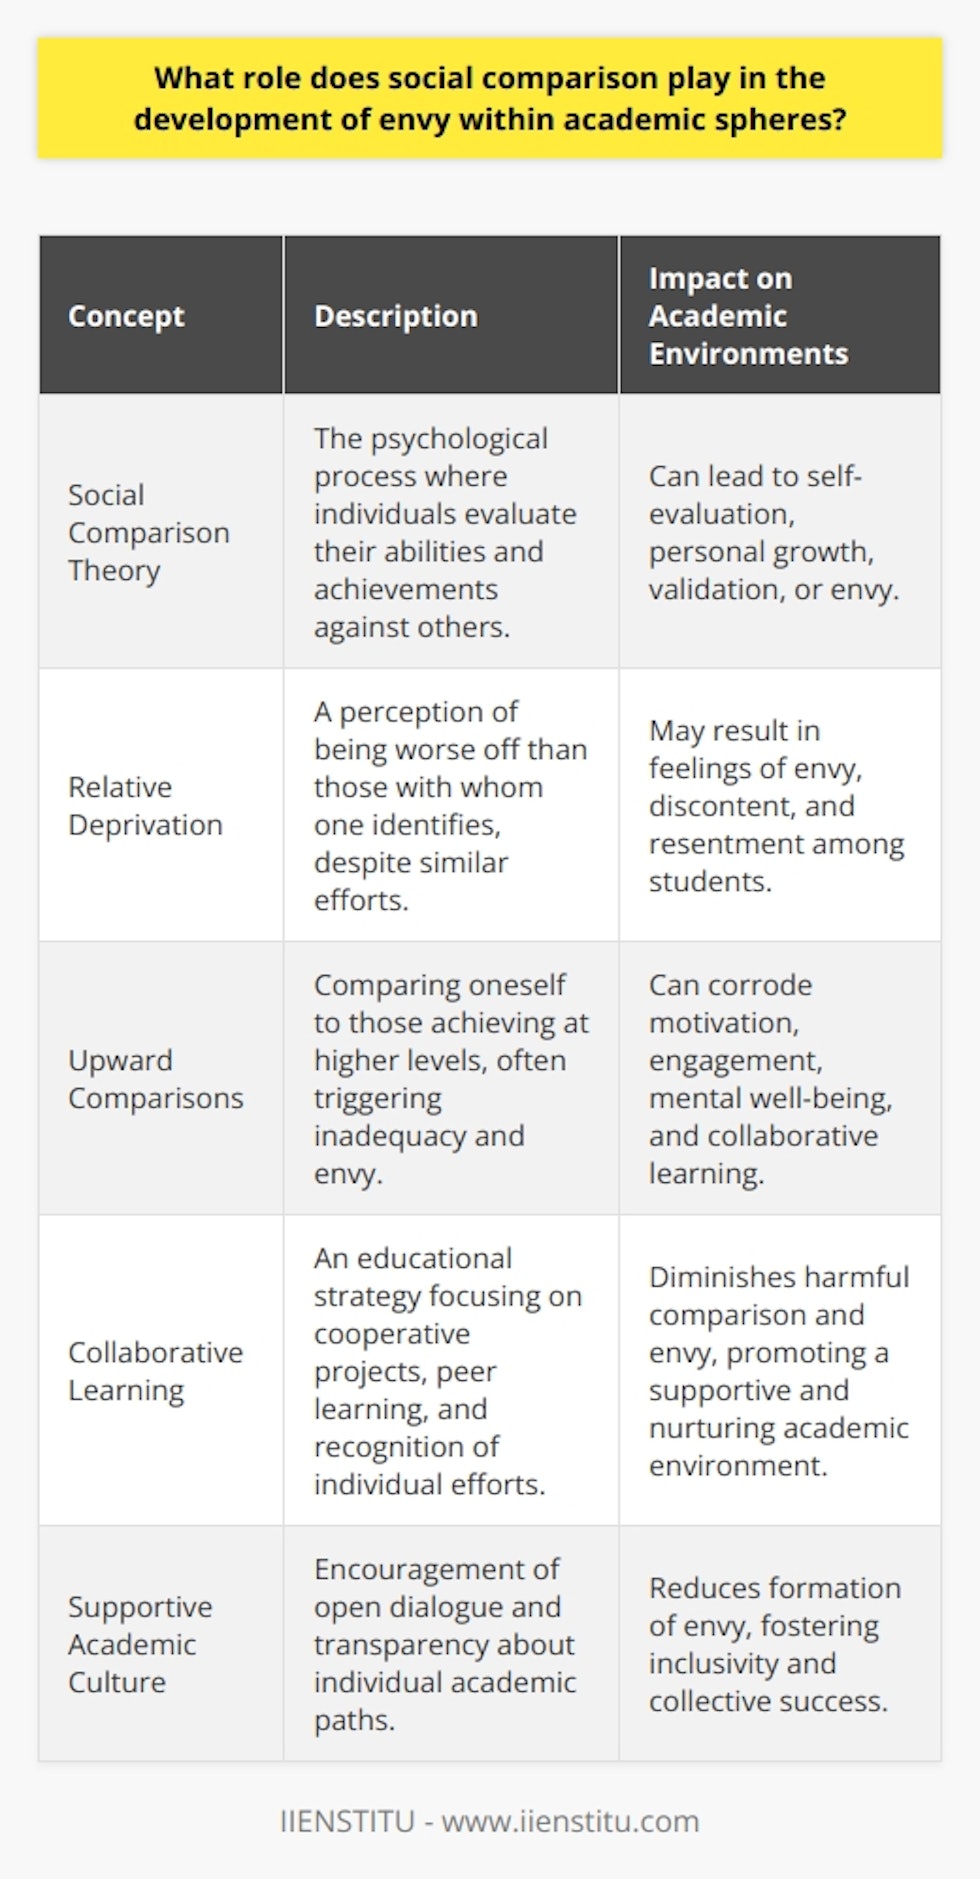 The phenomenon of social comparison, as a fundamental aspect of human behavior, plays a pivotal role in how emotions such as envy emerge and affect individuals within educational environments. Social comparison occurs as individuals compare their own achievements and abilities to that of their peers, creating a gauge for self-evaluation and personal growth.The Theory of Social ComparisonLeon Festinger's Social Comparison Theory illuminates the psychological mechanism that drives individuals to seek benchmarks against which to measure their own progress. In academic settings, this often translates into students evaluating their own intellectual standing and accomplishments against those of their classmates. These comparisons may provide a sense of validation or fuel a drive for improvement; however, they also have the potential to spark envy when discrepancies between a student’s own performance and that of peers are perceived.Relative Deprivation and EnvyThe concept of relative deprivation articulates a state where an individual sees themselves as worse off than others with whom they identify, leading to feelings of discontent and resentment. In academic spheres, when a student perceives that they are lacking the successes or attributes of their peers, despite putting in similar efforts, they can experience envy, which is essentially coveting what others possess that one does not.The Link between Upward Comparisons and EnvyUpward social comparisons, specifically, are often entwined with the development of envy. When students compare themselves to those achieving at higher levels, it can elicit a sense of inadequacy and longing for the accolades and opportunities that seem allotted to their more successful counterparts. This envy can be corrosive, impacting the student’s motivation, engagement, and mental well-being. It can also lead to resentful attitudes and conflict between peers, potentially disrupting the collaborative nature of learning.Counteracting Envy Through CollaborationTo curb the negative impacts of envy, educational institutions can adopt strategies that steer the focus away from excessive competition to more cooperative learning models. This approach can include: 1. Group projects that emphasize the diverse contributions of each member.2. Peer learning opportunities that encourage knowledge sharing.3. Recognition of individual effort and improvement rather than only top achievements.4. Encouraging personal goal setting instead of comparison-based objectives.By valuing individual progress and the collective success of a learning group, the academic environment can dampen the need for harmful comparisons and the ensuing envy.Promoting a Supportive Academic CultureAdditionally, facilitating open dialogues about the nature of comparison and the emotions it can stir may help students navigate their feelings constructively. Transparency about goals, outcomes, and the varying paths to success can underscore the diversity of academic journeys and minimize the formation of envy.Overall, while social comparison is an innate and unavoidable part of the educational experience, it is imperative to understand and manage its impact on student emotions and relationships. By fostering an environment of inclusivity, cooperation, and personal growth, educators can diminish envy and create a nurturing academic culture conducive to the success of all students.